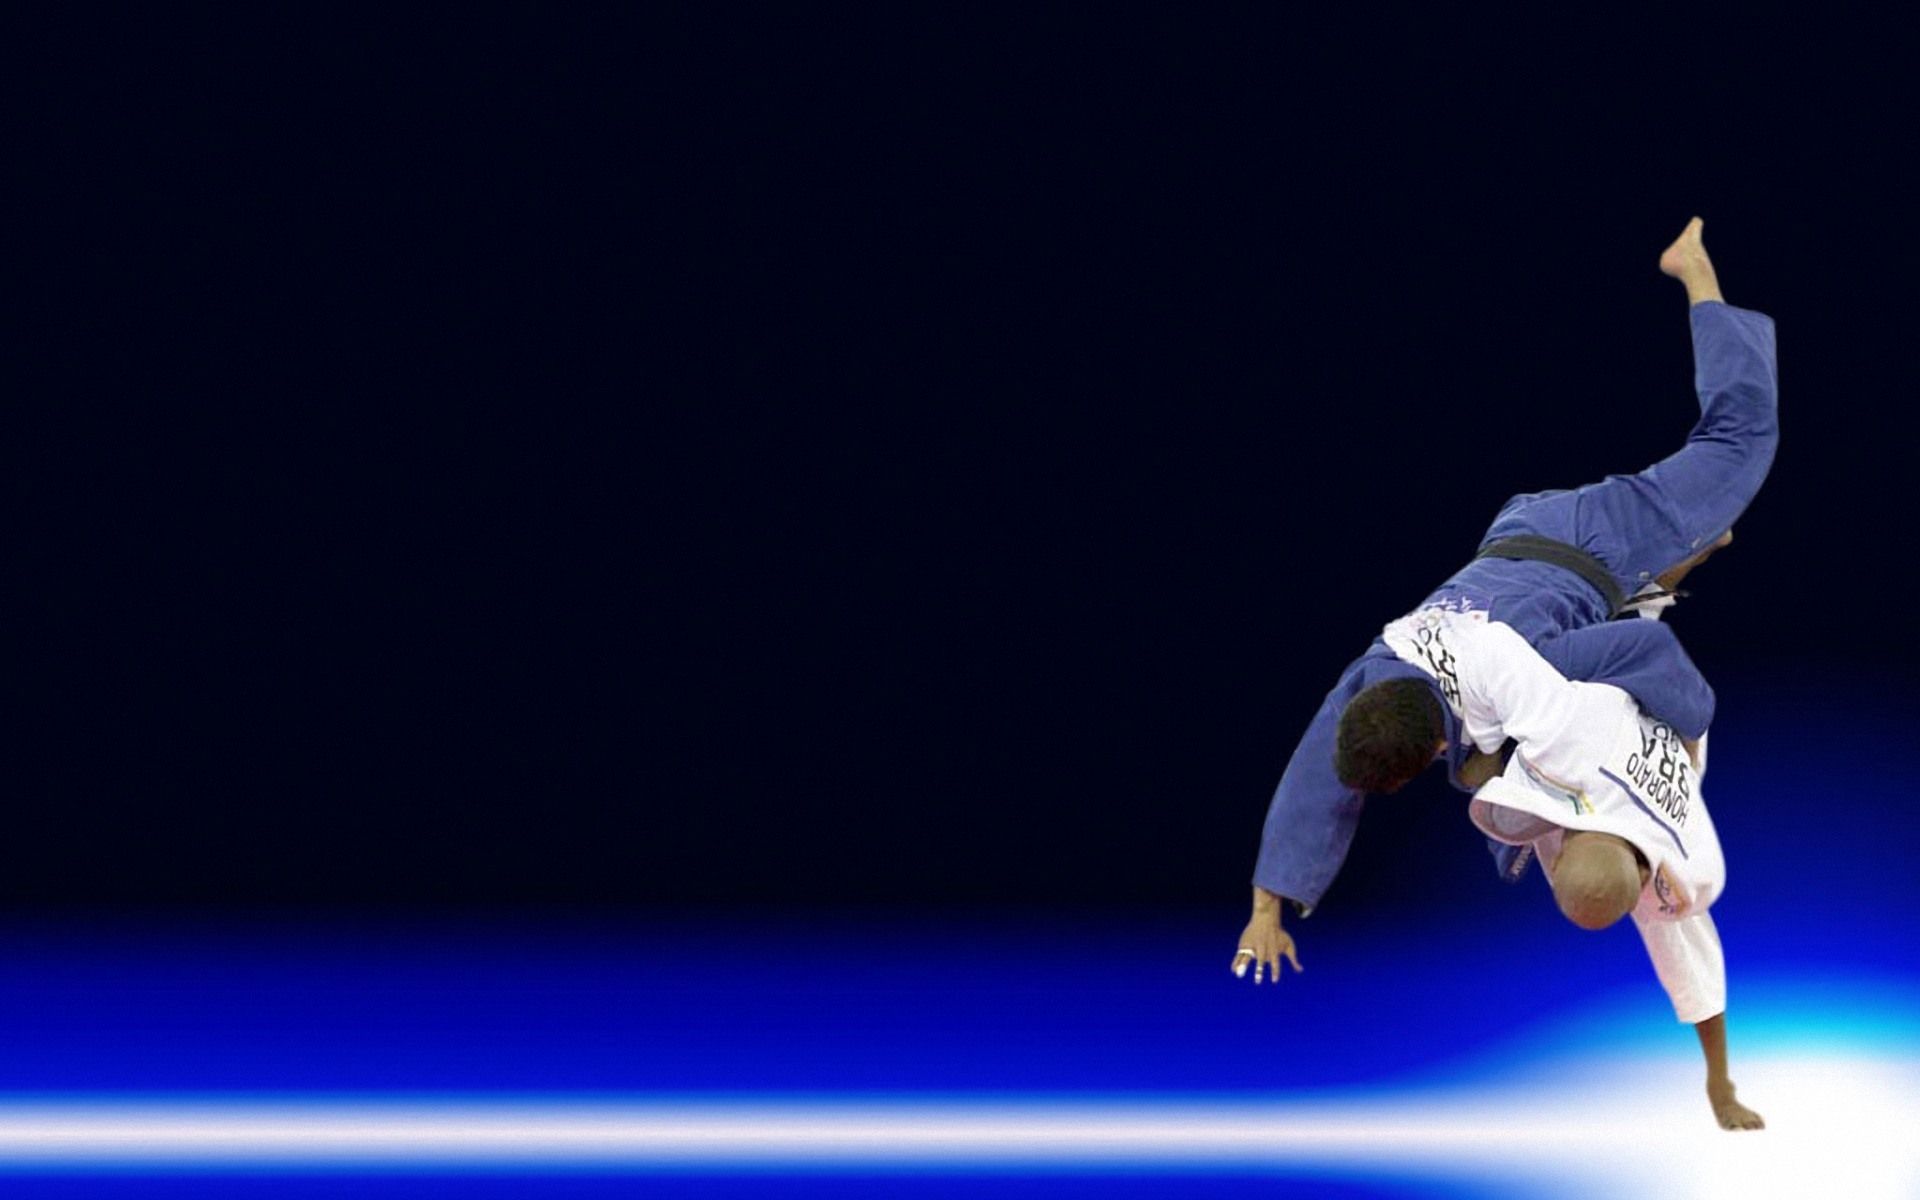 Free Cool Judo Images on your Desktop